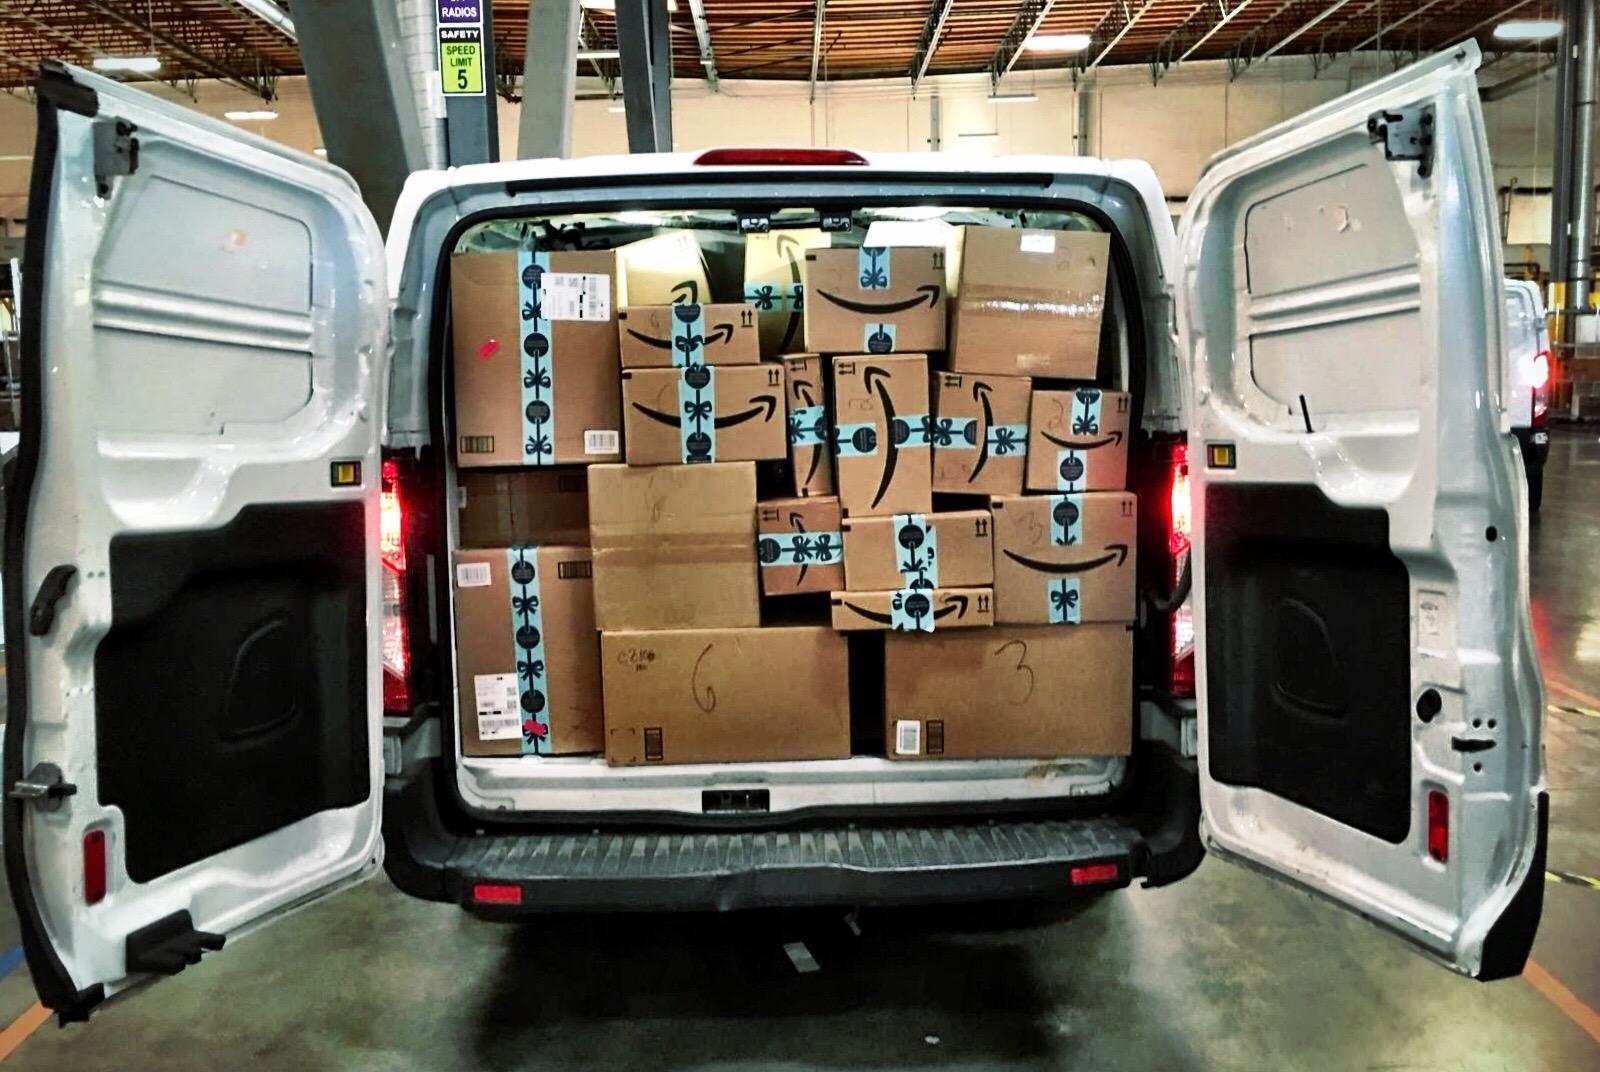 An Amazon van filled with packages.